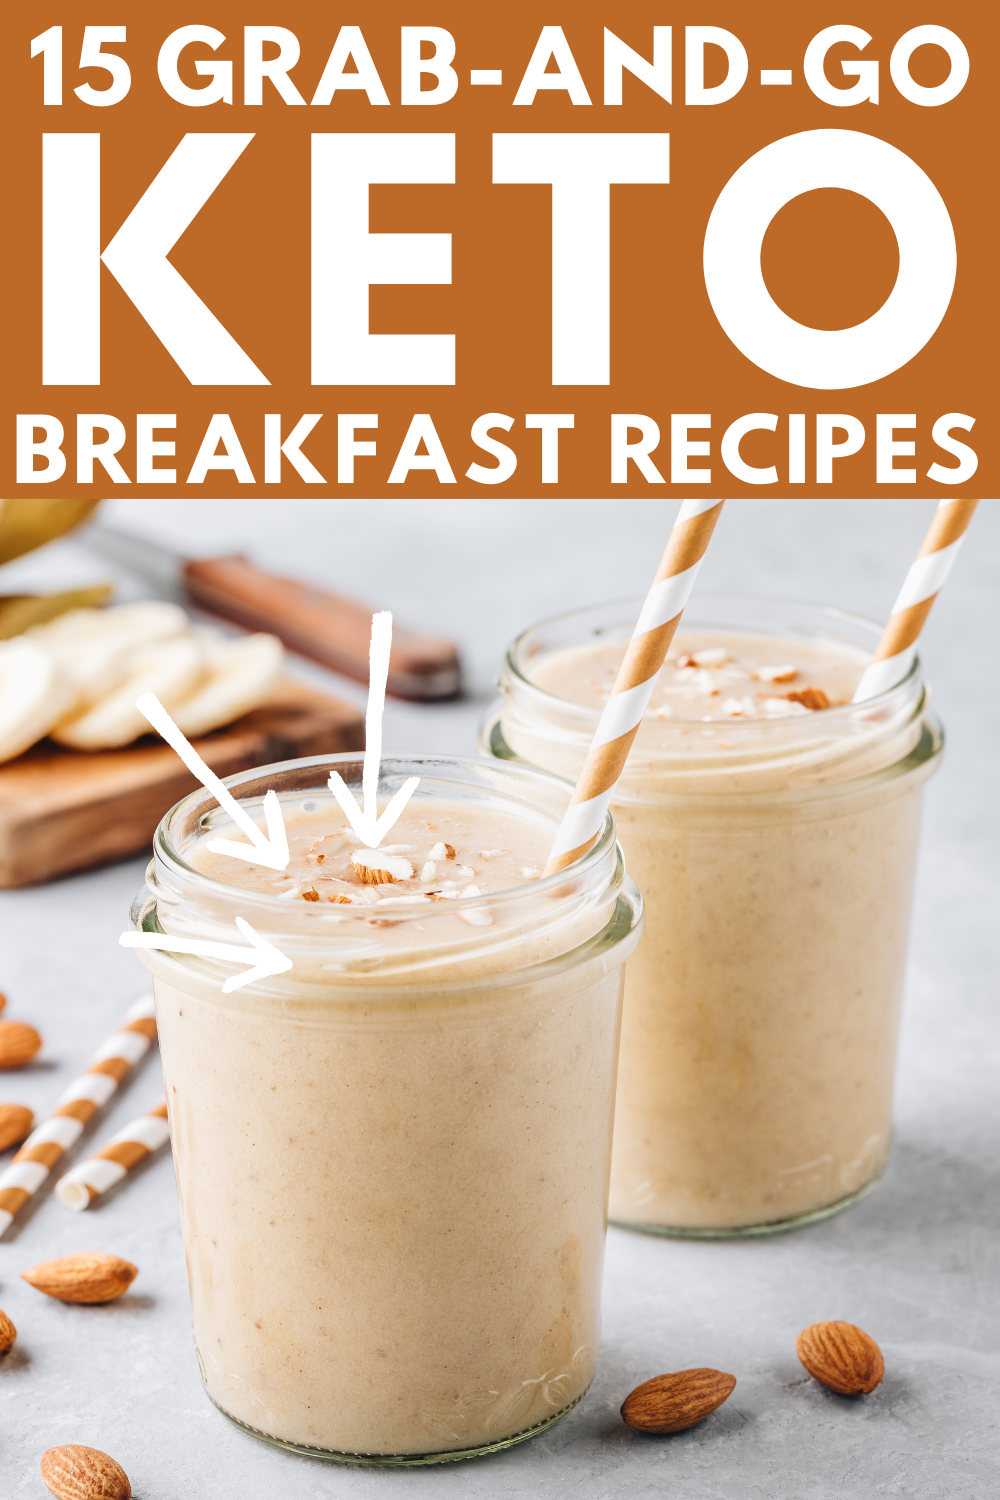 Kickstart Your Keto Journey with These 15 On-the-Go Breakfast Recipes